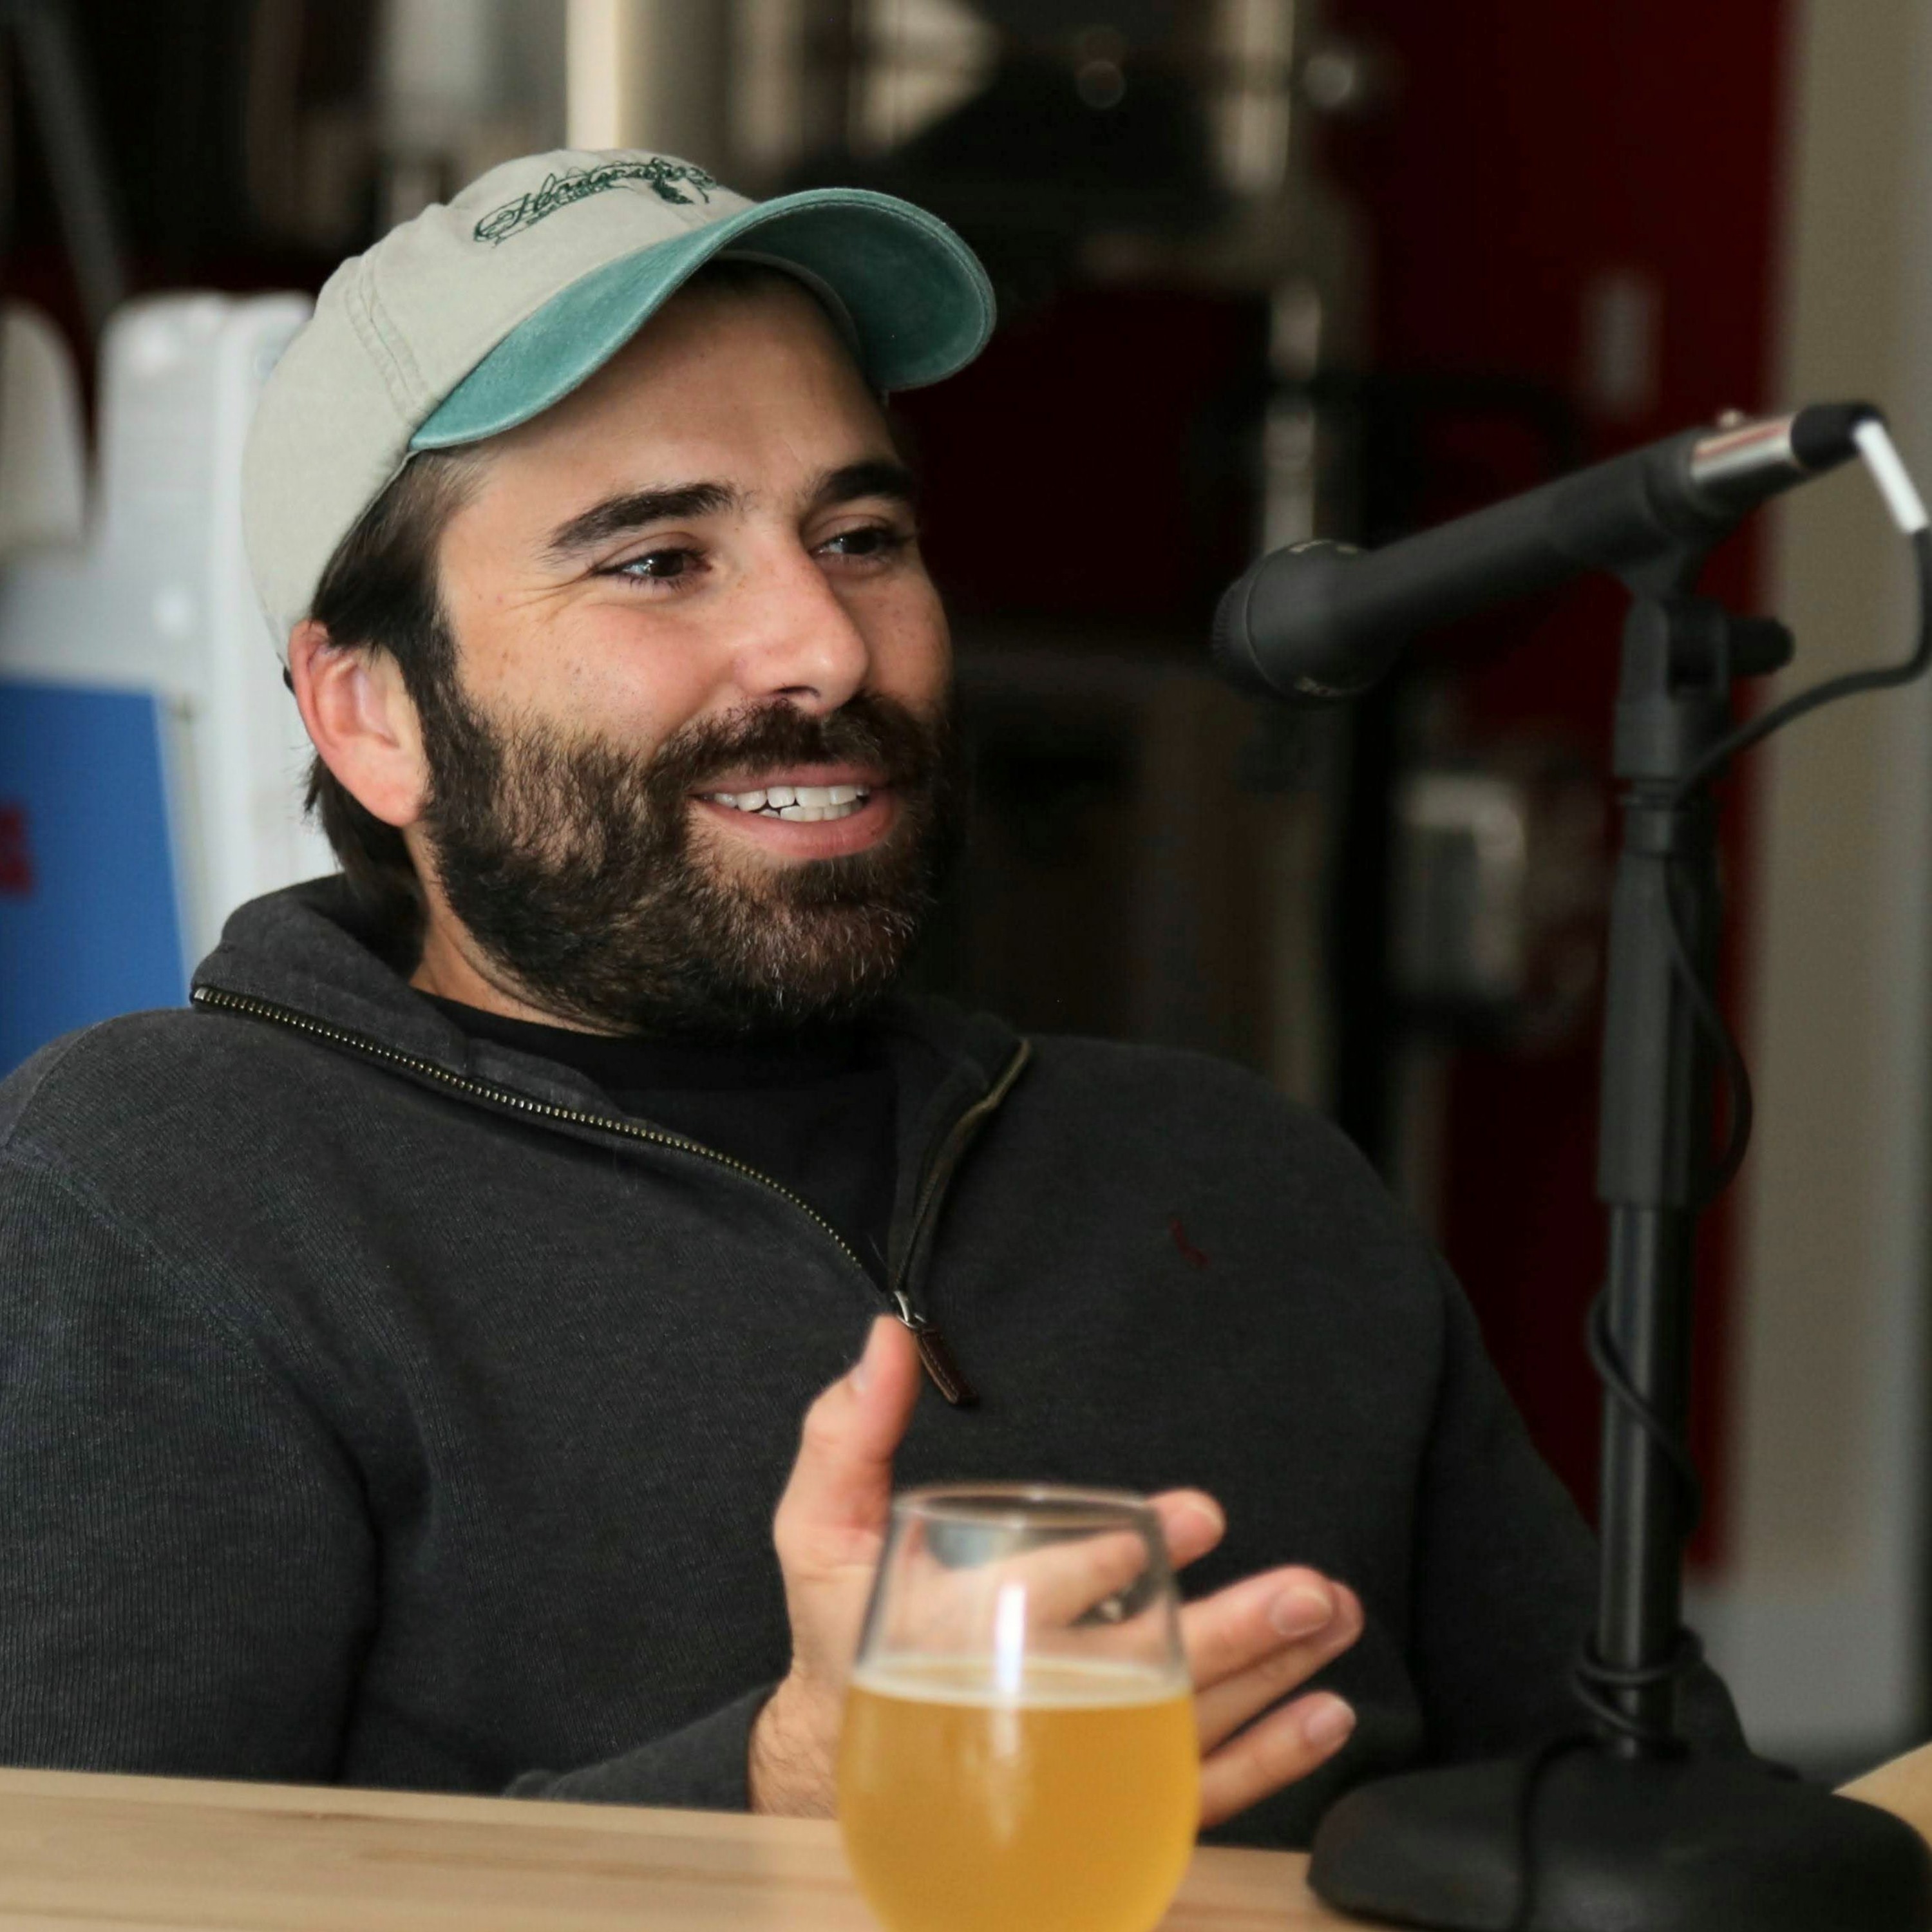 Marco Leyte-Vidal of Miami’s Unseen Creatures Brewing on beer and creativity